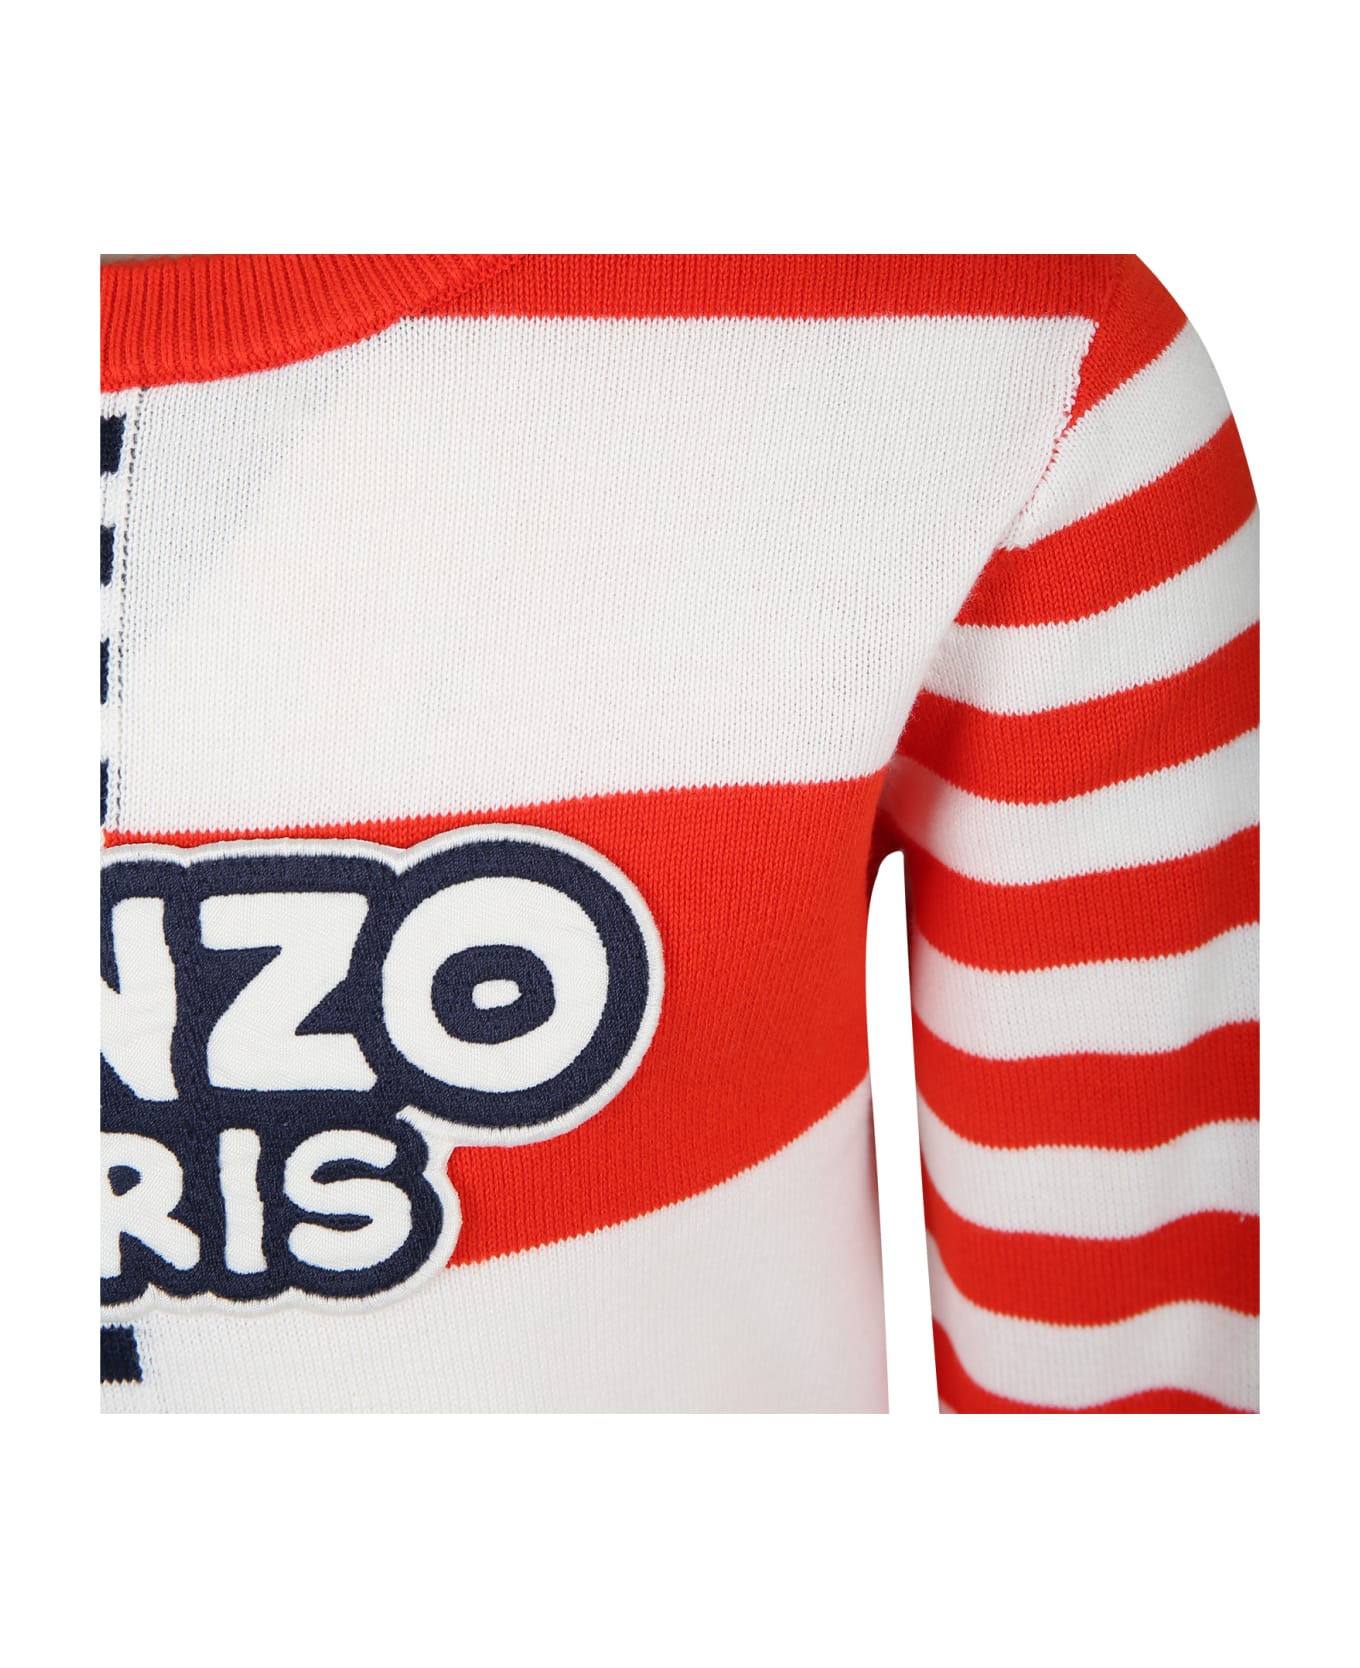 Kenzo Kids Multicolored Sweater For Boy With Logo - Multicolor